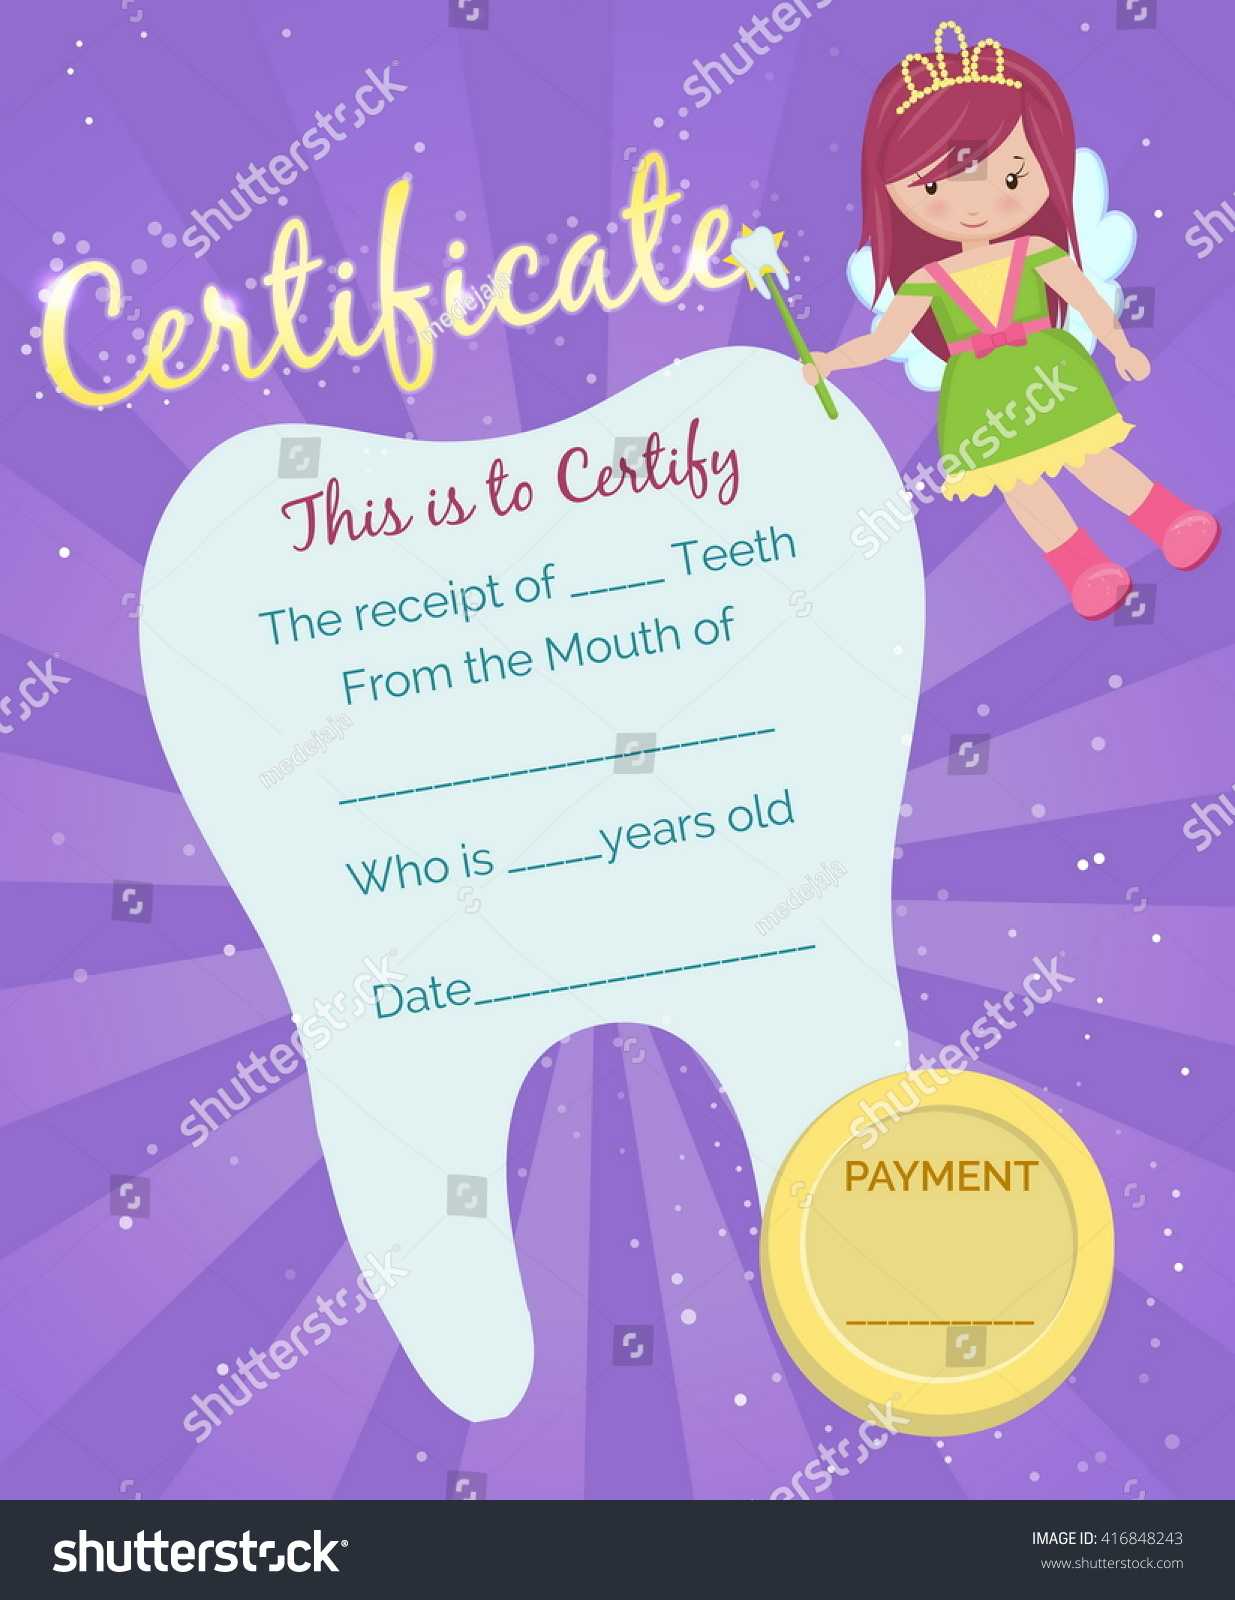 Cute Tooth Fairy Receipt Certificate Template Stock Vector Throughout Free Tooth Fairy Certificate Template